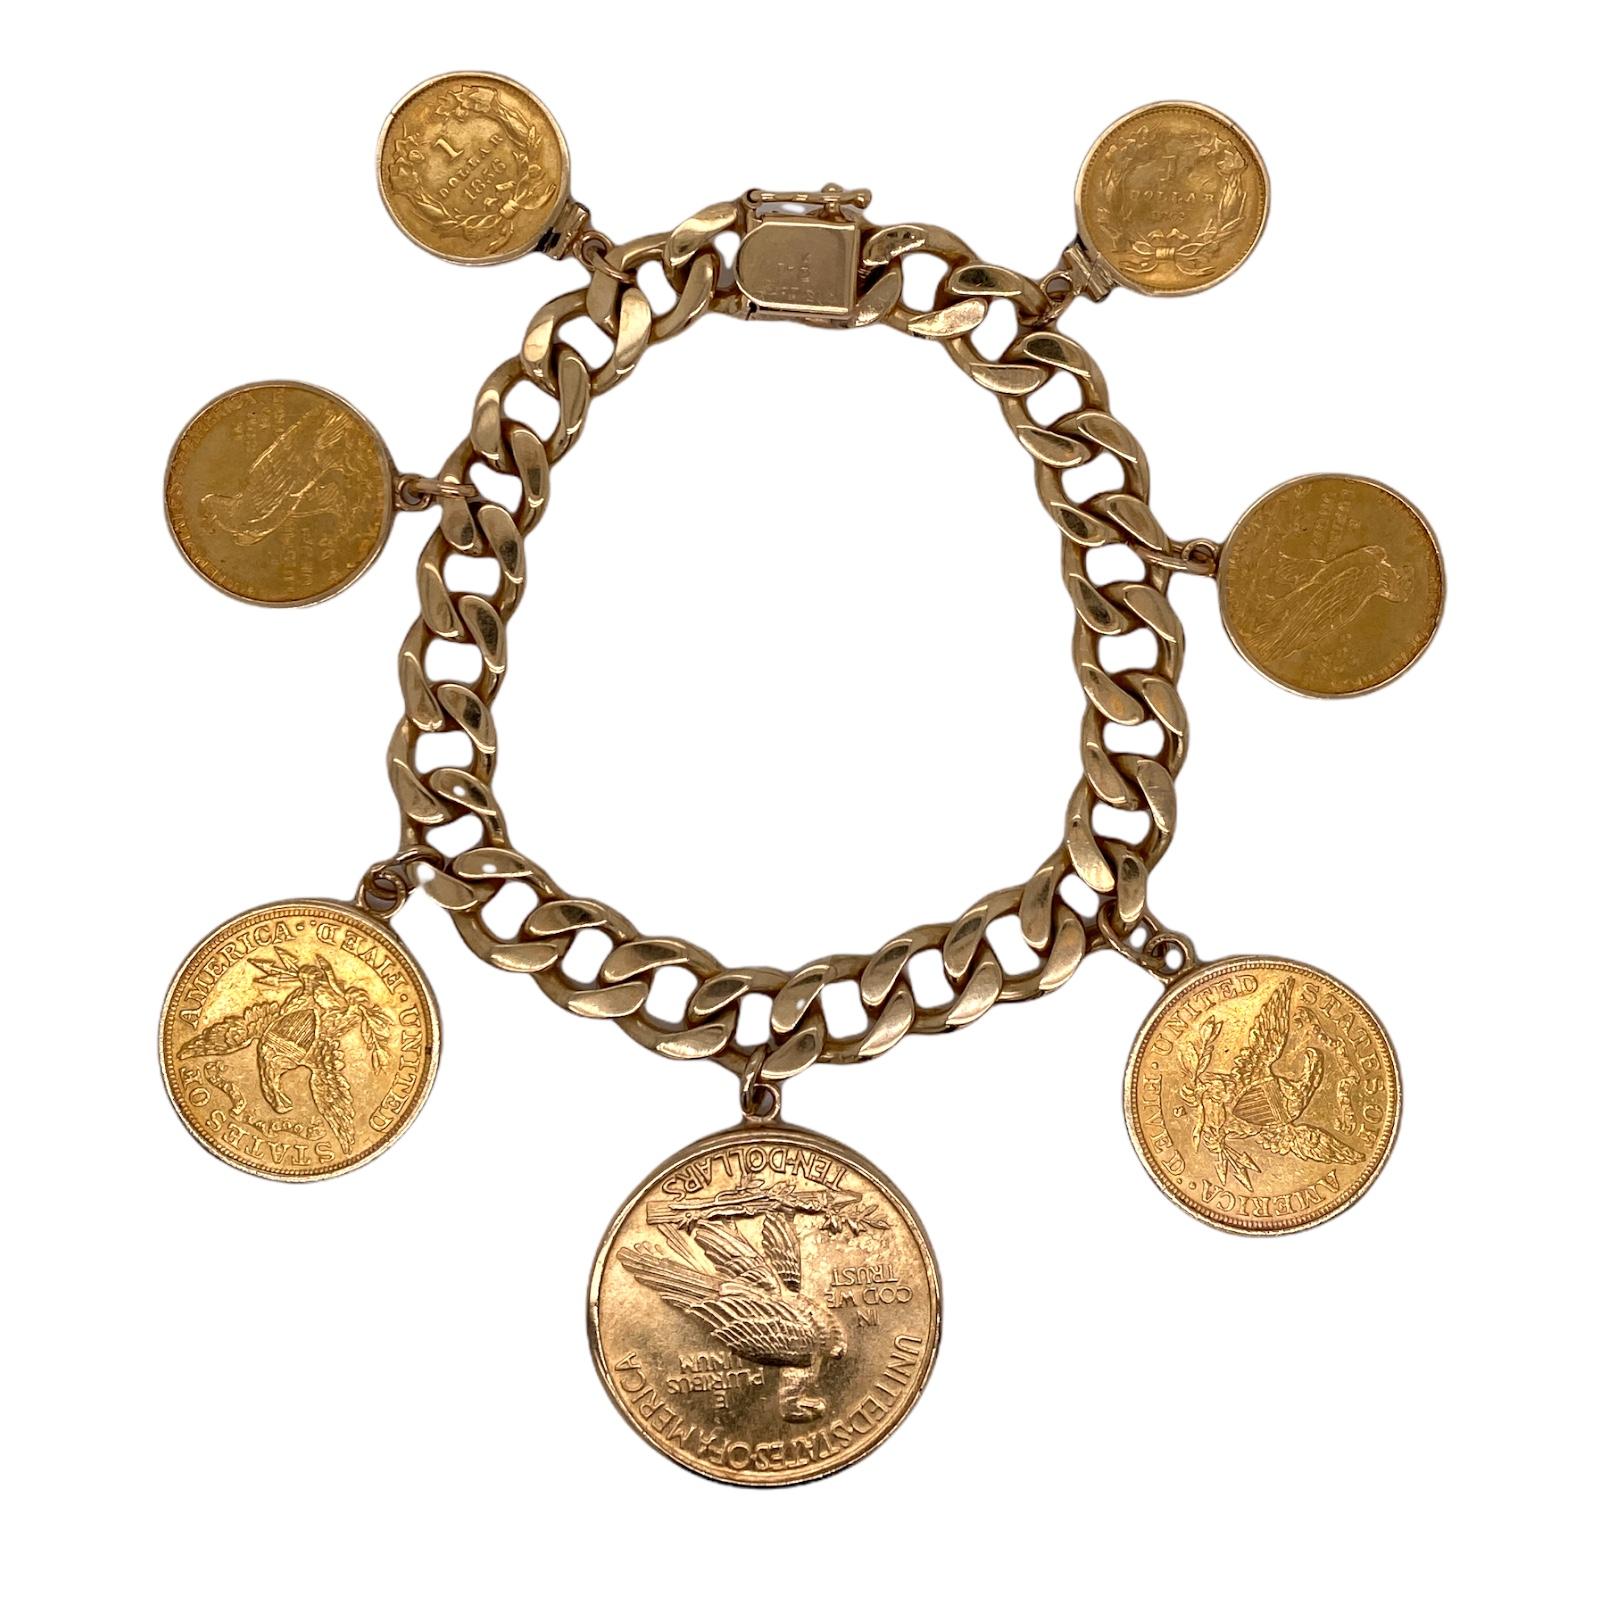 Fabulous vintage coin charm bracelet fashioned in 14 karat yellow gold. The 22 karat US gold coins are 2 x $1.00, 2 x $2.50, 2 x $5.00, and 1 x $10.00 coins circa late 1800's. The Cuban link bracelet measures 7 inches in length and approximately .40